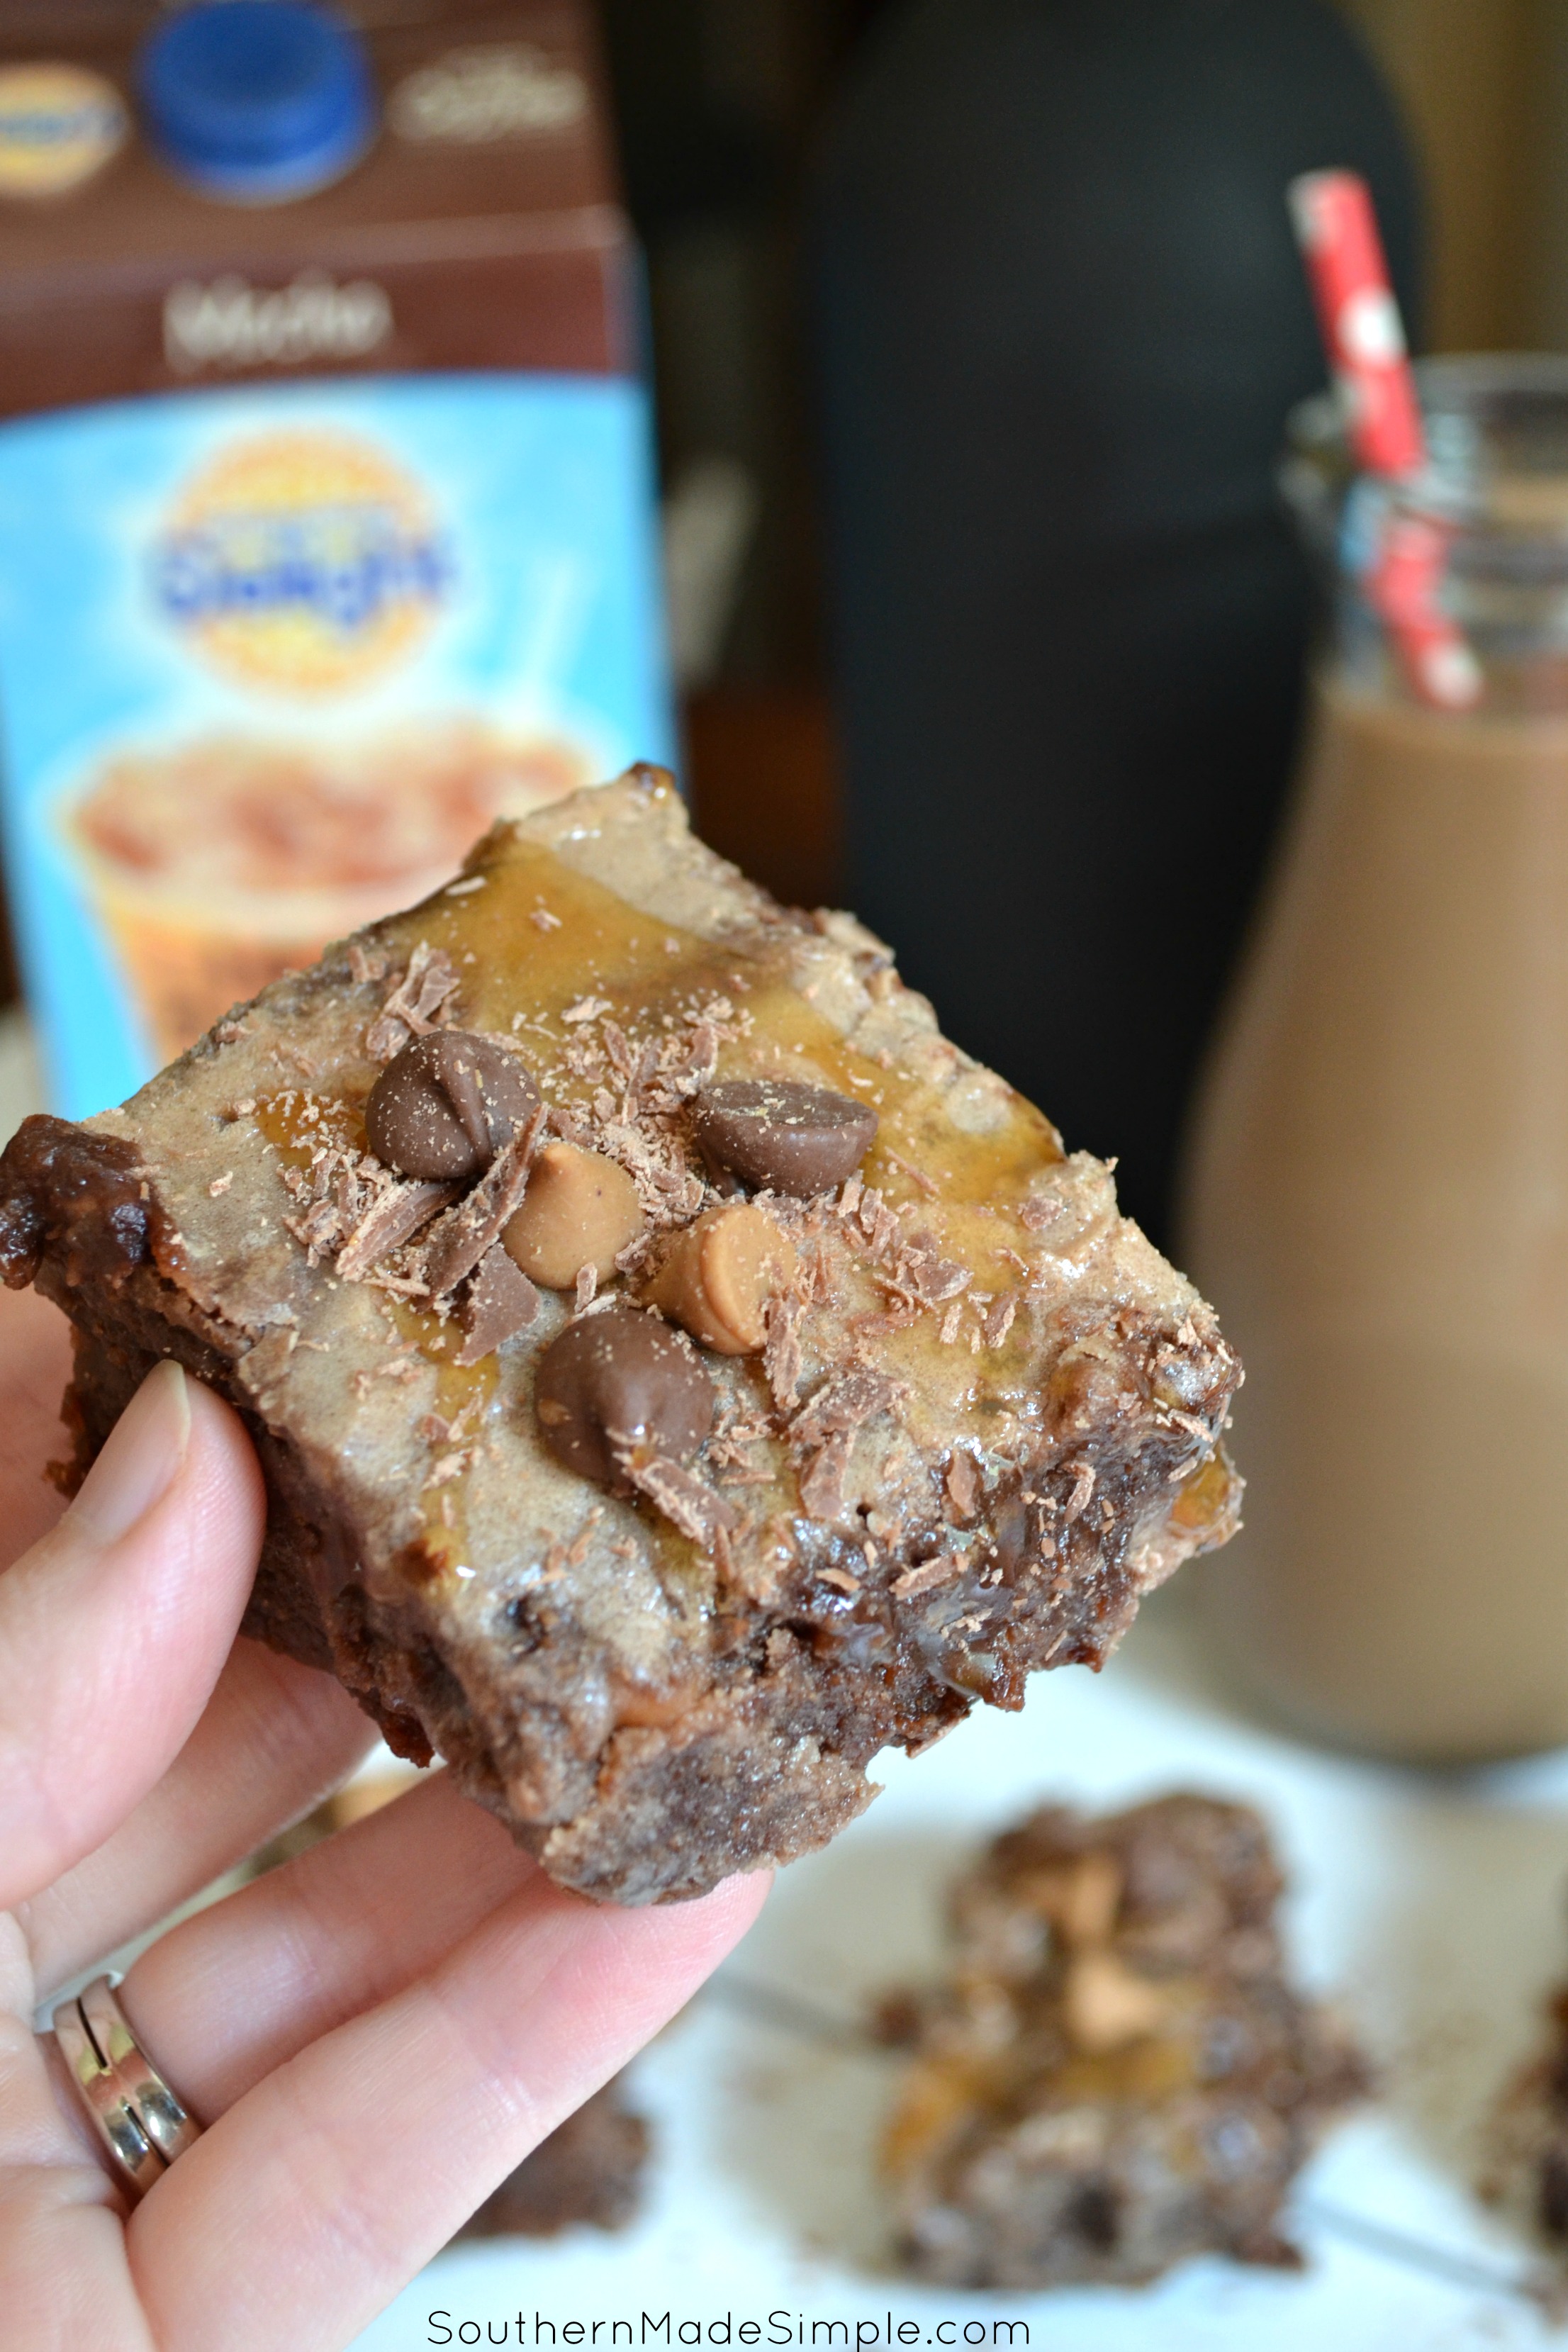 Mocha Fudge Brownies with Creamed Coffee and Caramel Drizzle - these little squares of Heaven are to die for! And I didn't even have to go to a specialty coffee shop to get them! #FoundMyDelight #ad @walmart